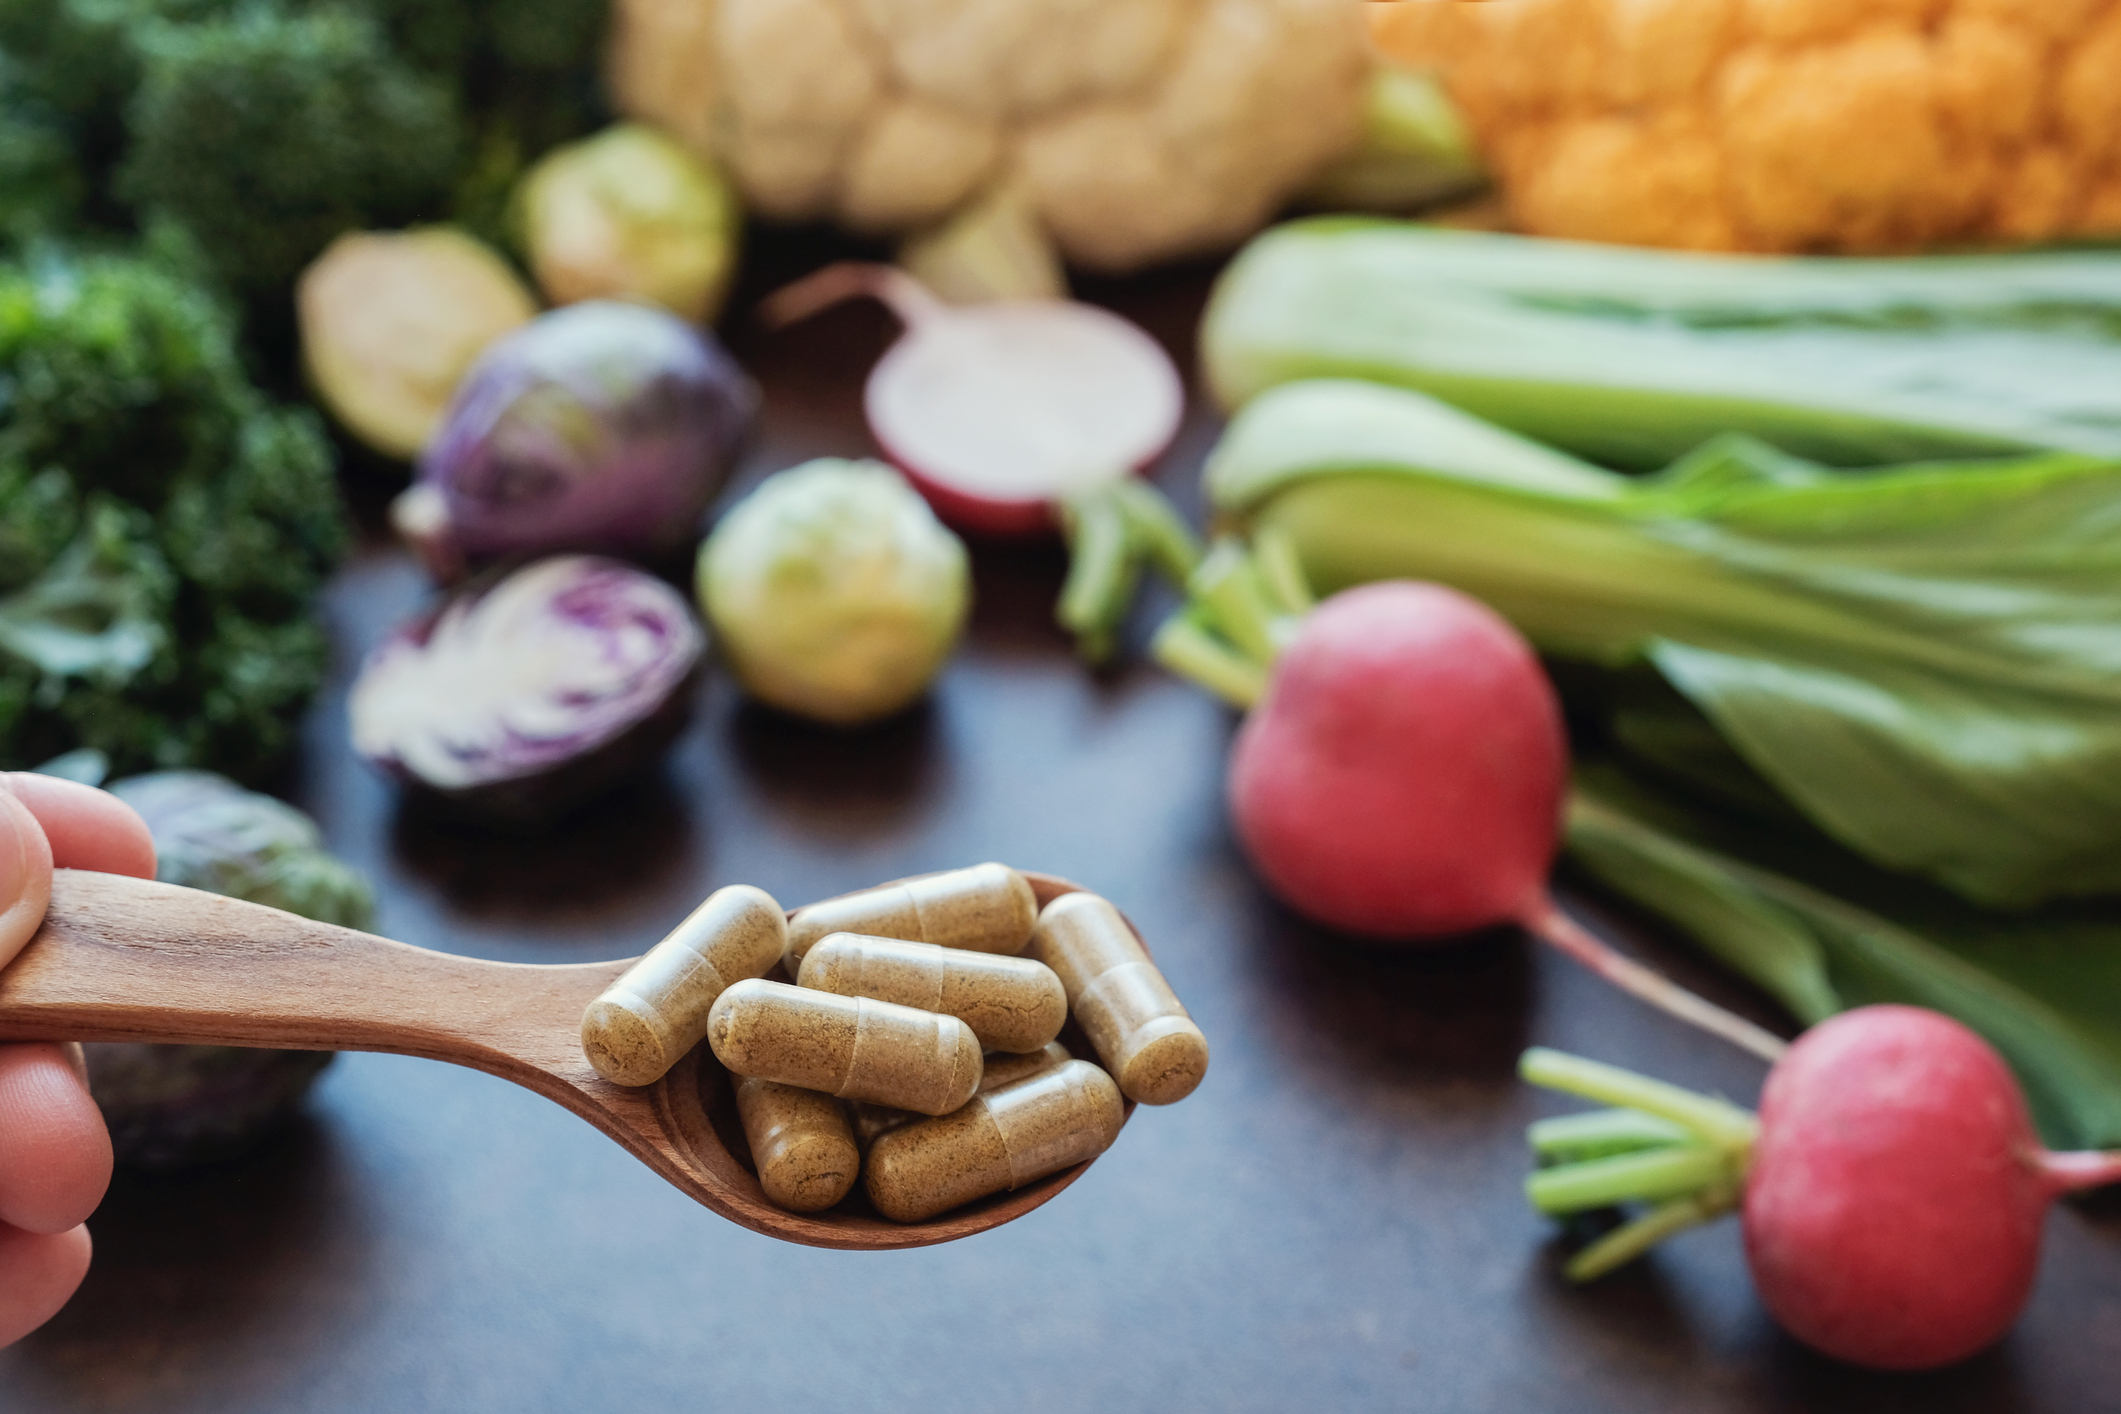 Explain the benefits of using supplements to support health and fitness goals